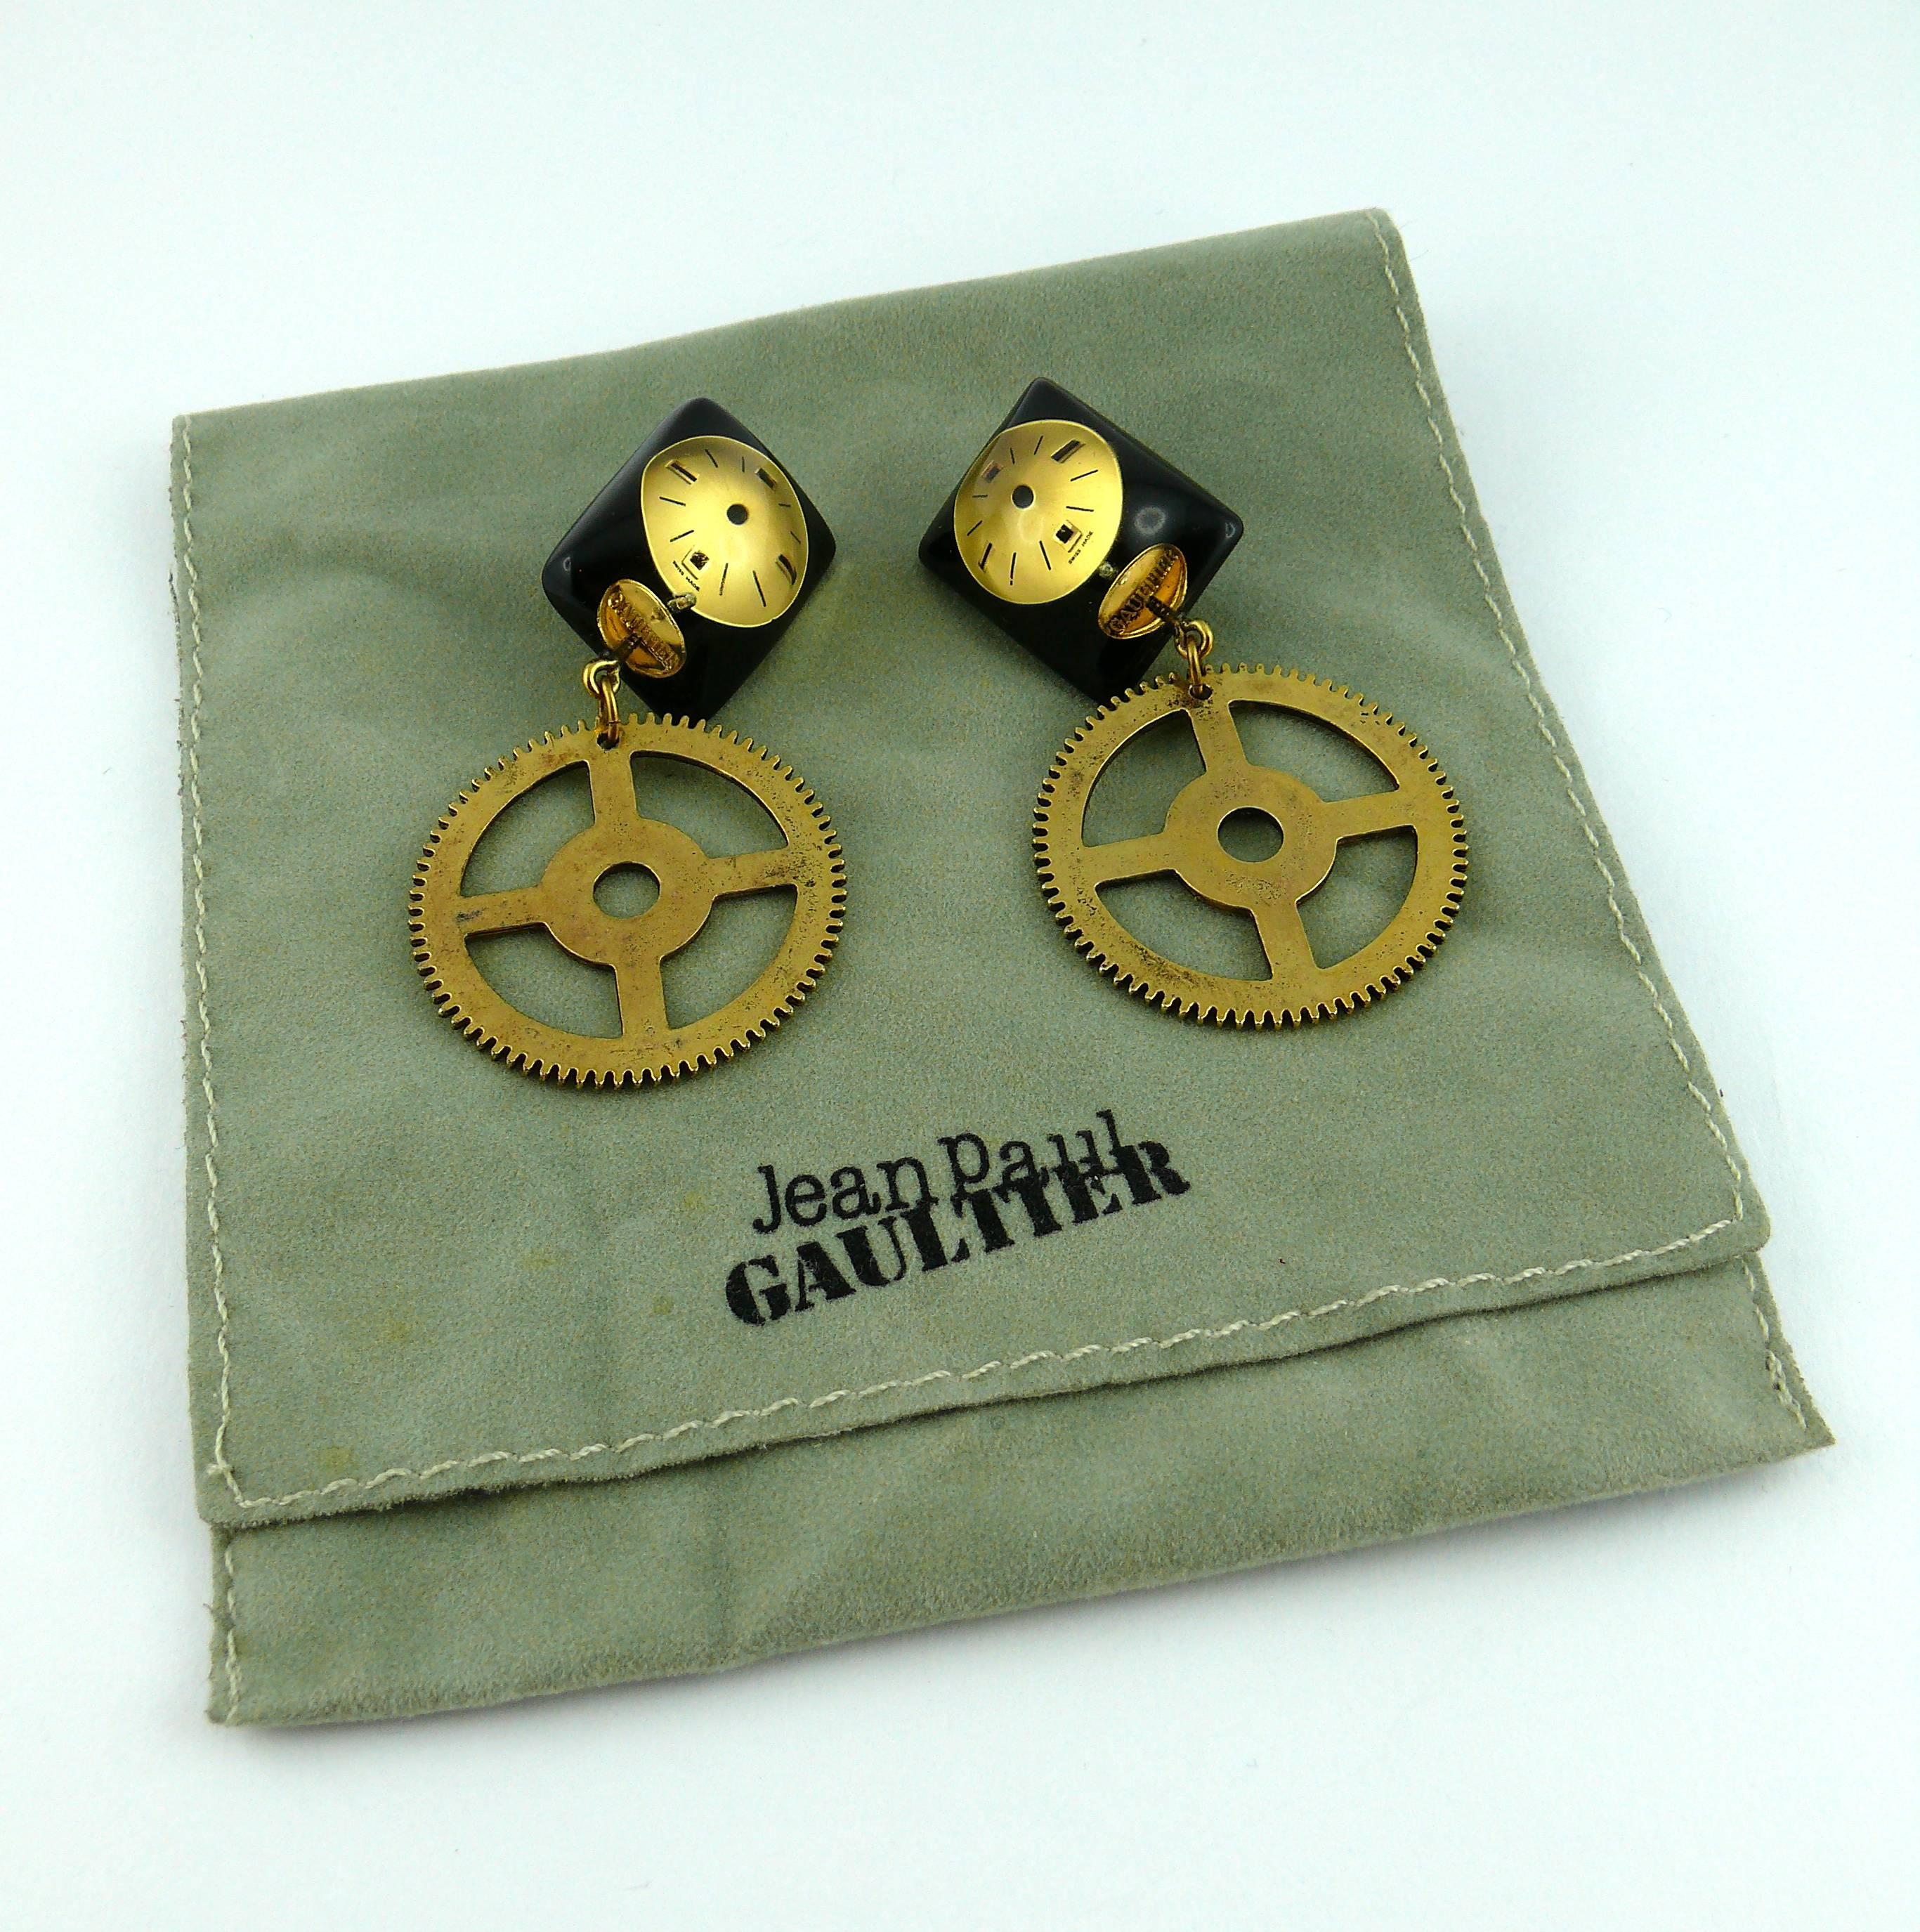 Jean Paul Gaultier Vintage Rare Steampunk Watch Dangling Earrings In Excellent Condition For Sale In Nice, FR